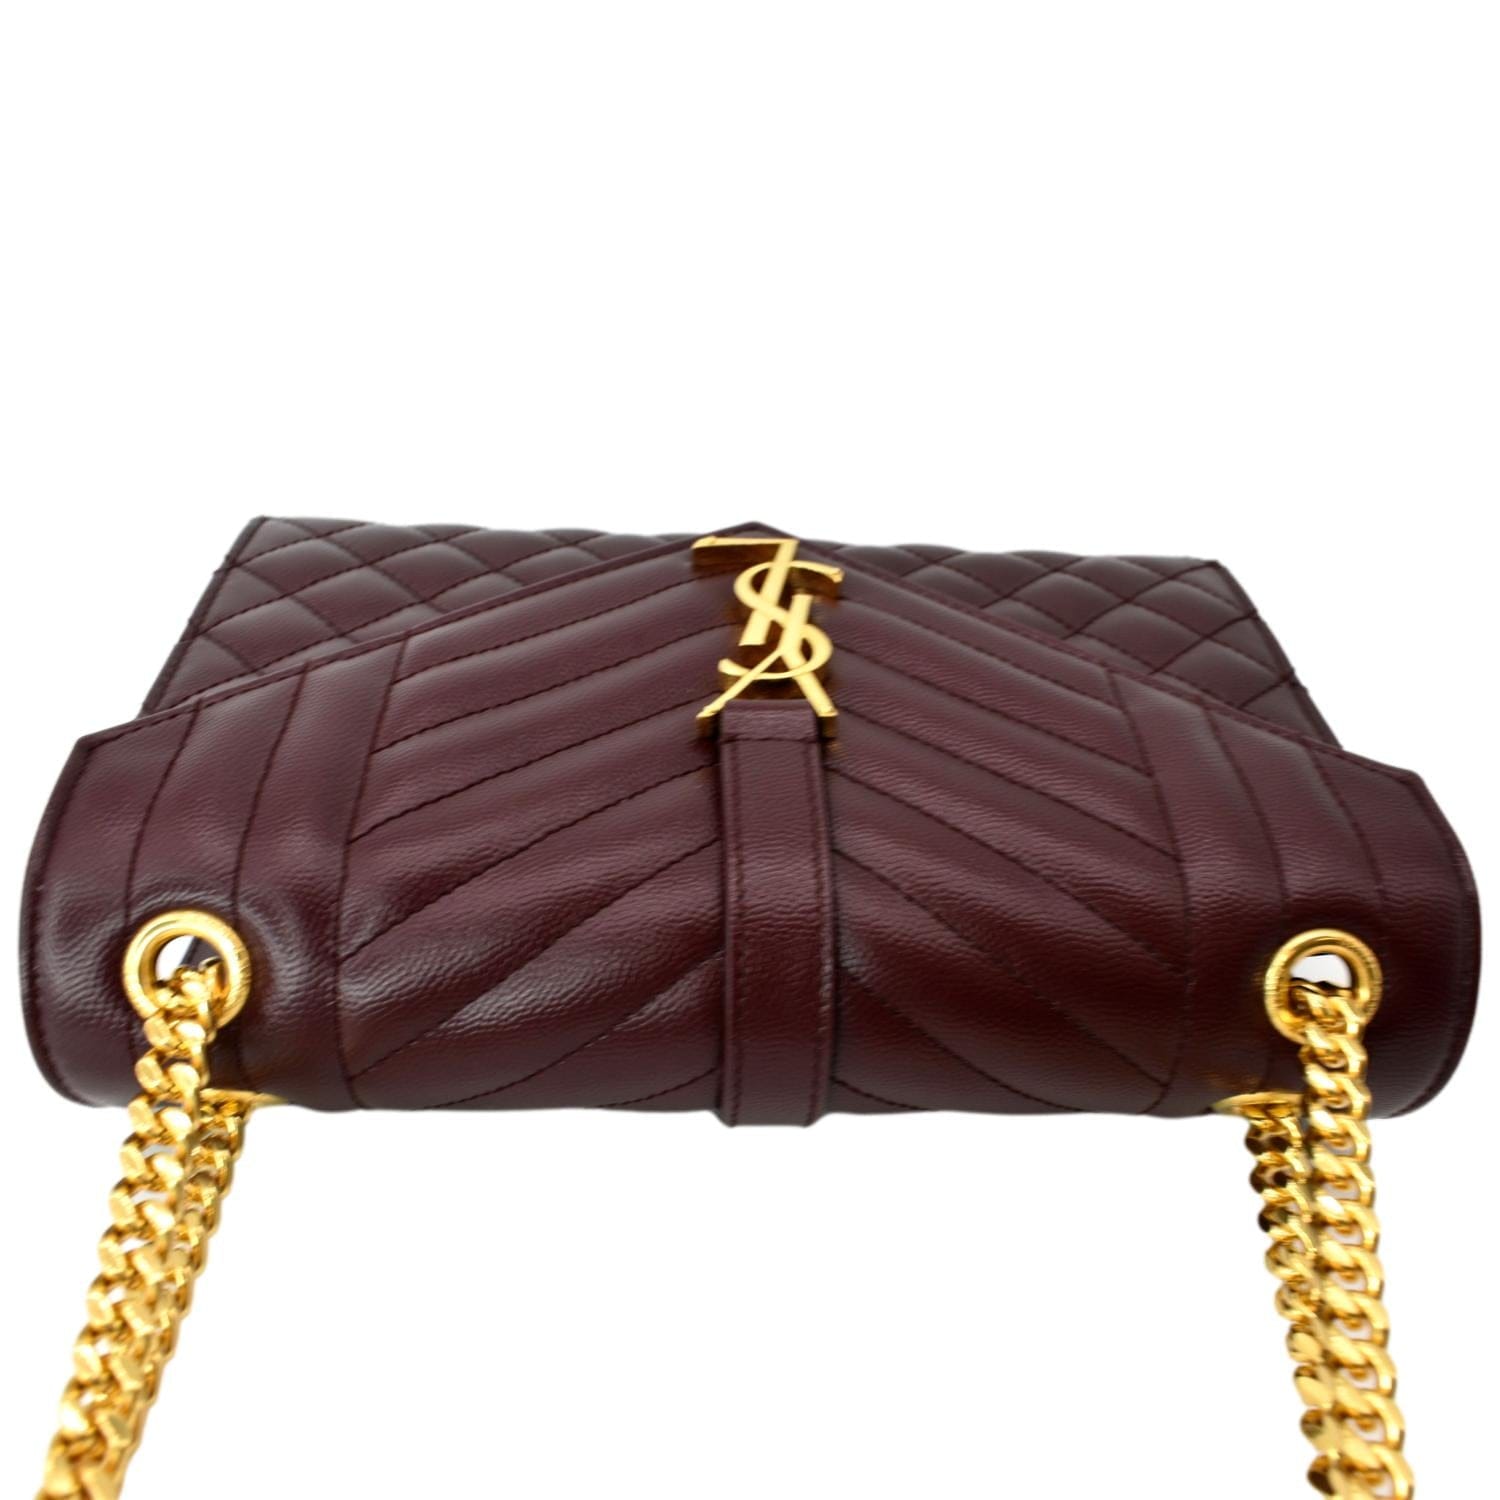 YSL Envelope Chain Bag  Consign Jewelry - Liberty Lake